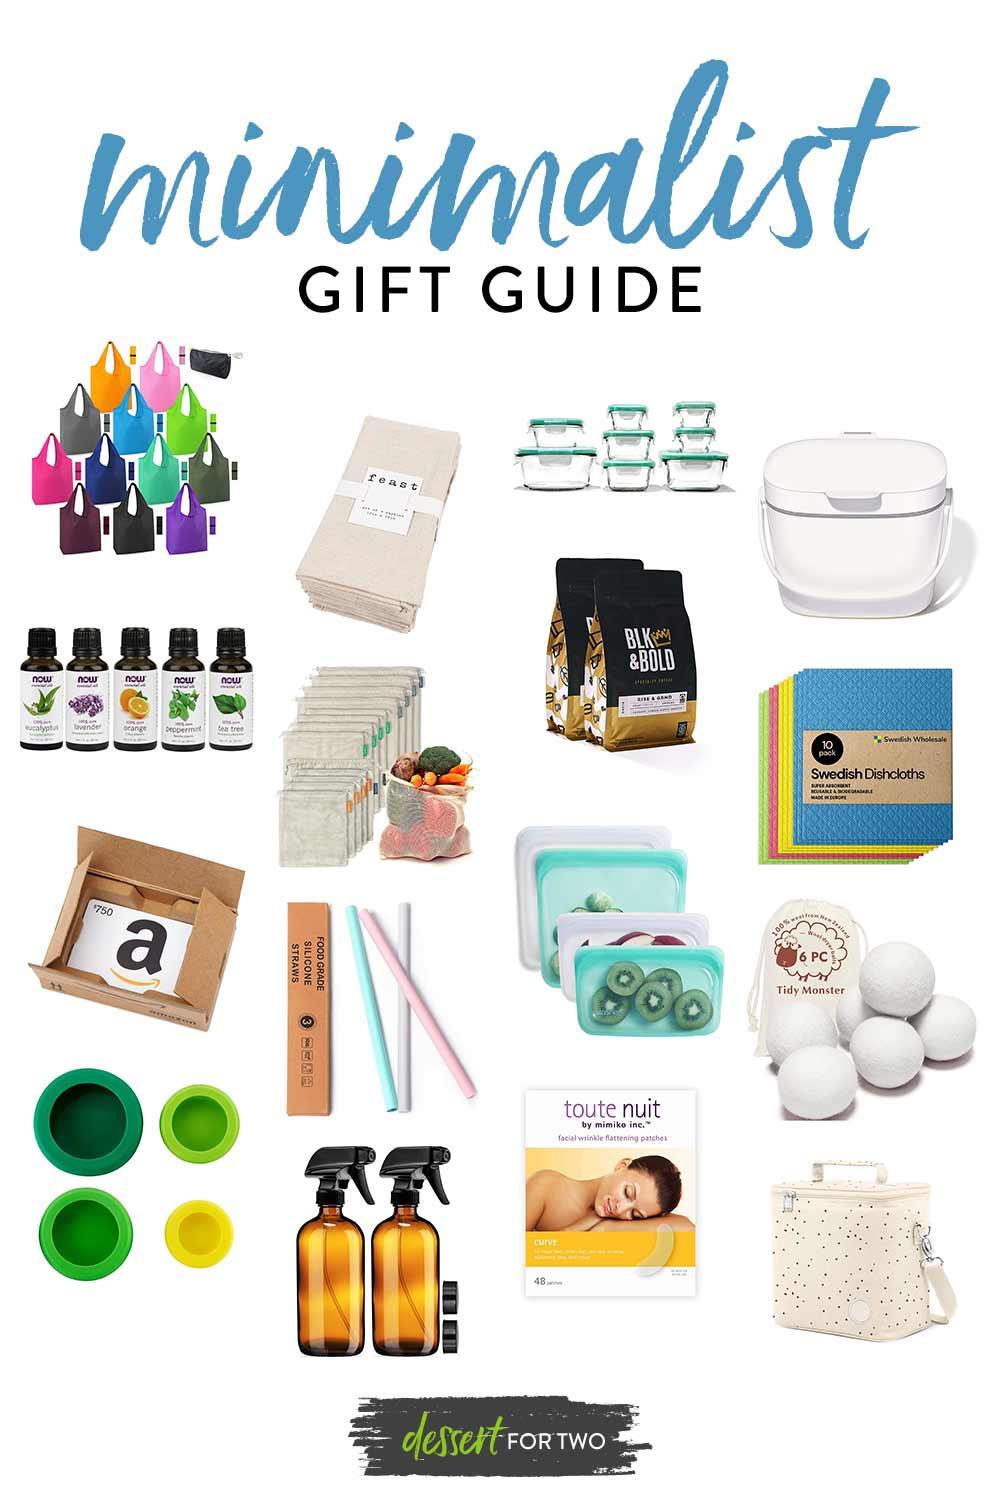 Holiday Gift Guide for Minimalists by Dessert for Two